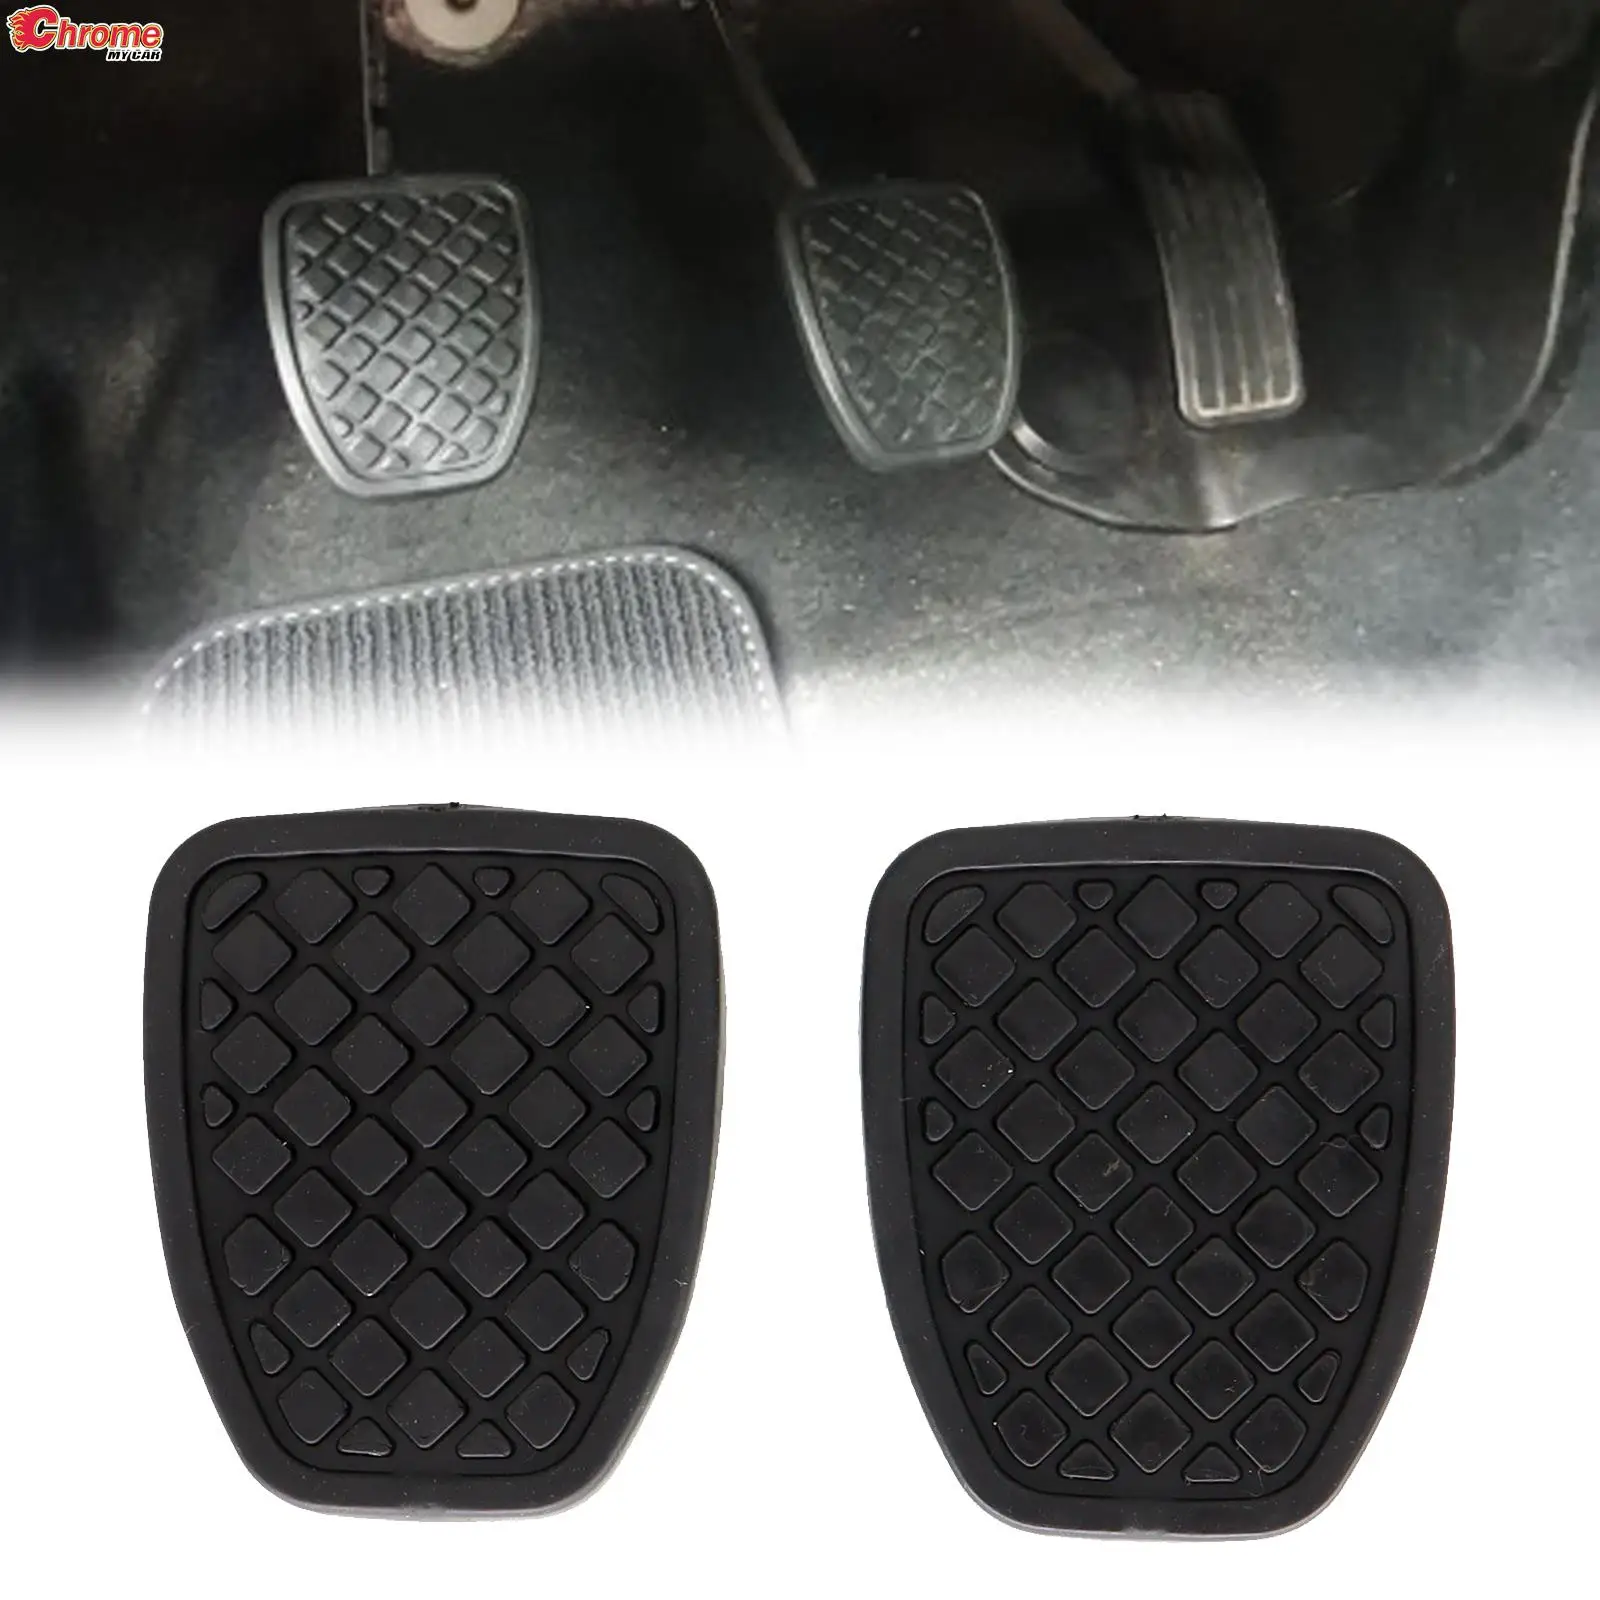 Pair Brake Clutch Pedal Rubber Pad Cover Replacement for Subaru Forester Legacy WRX IMPREZA Outback Baja Loyale Car Accessories